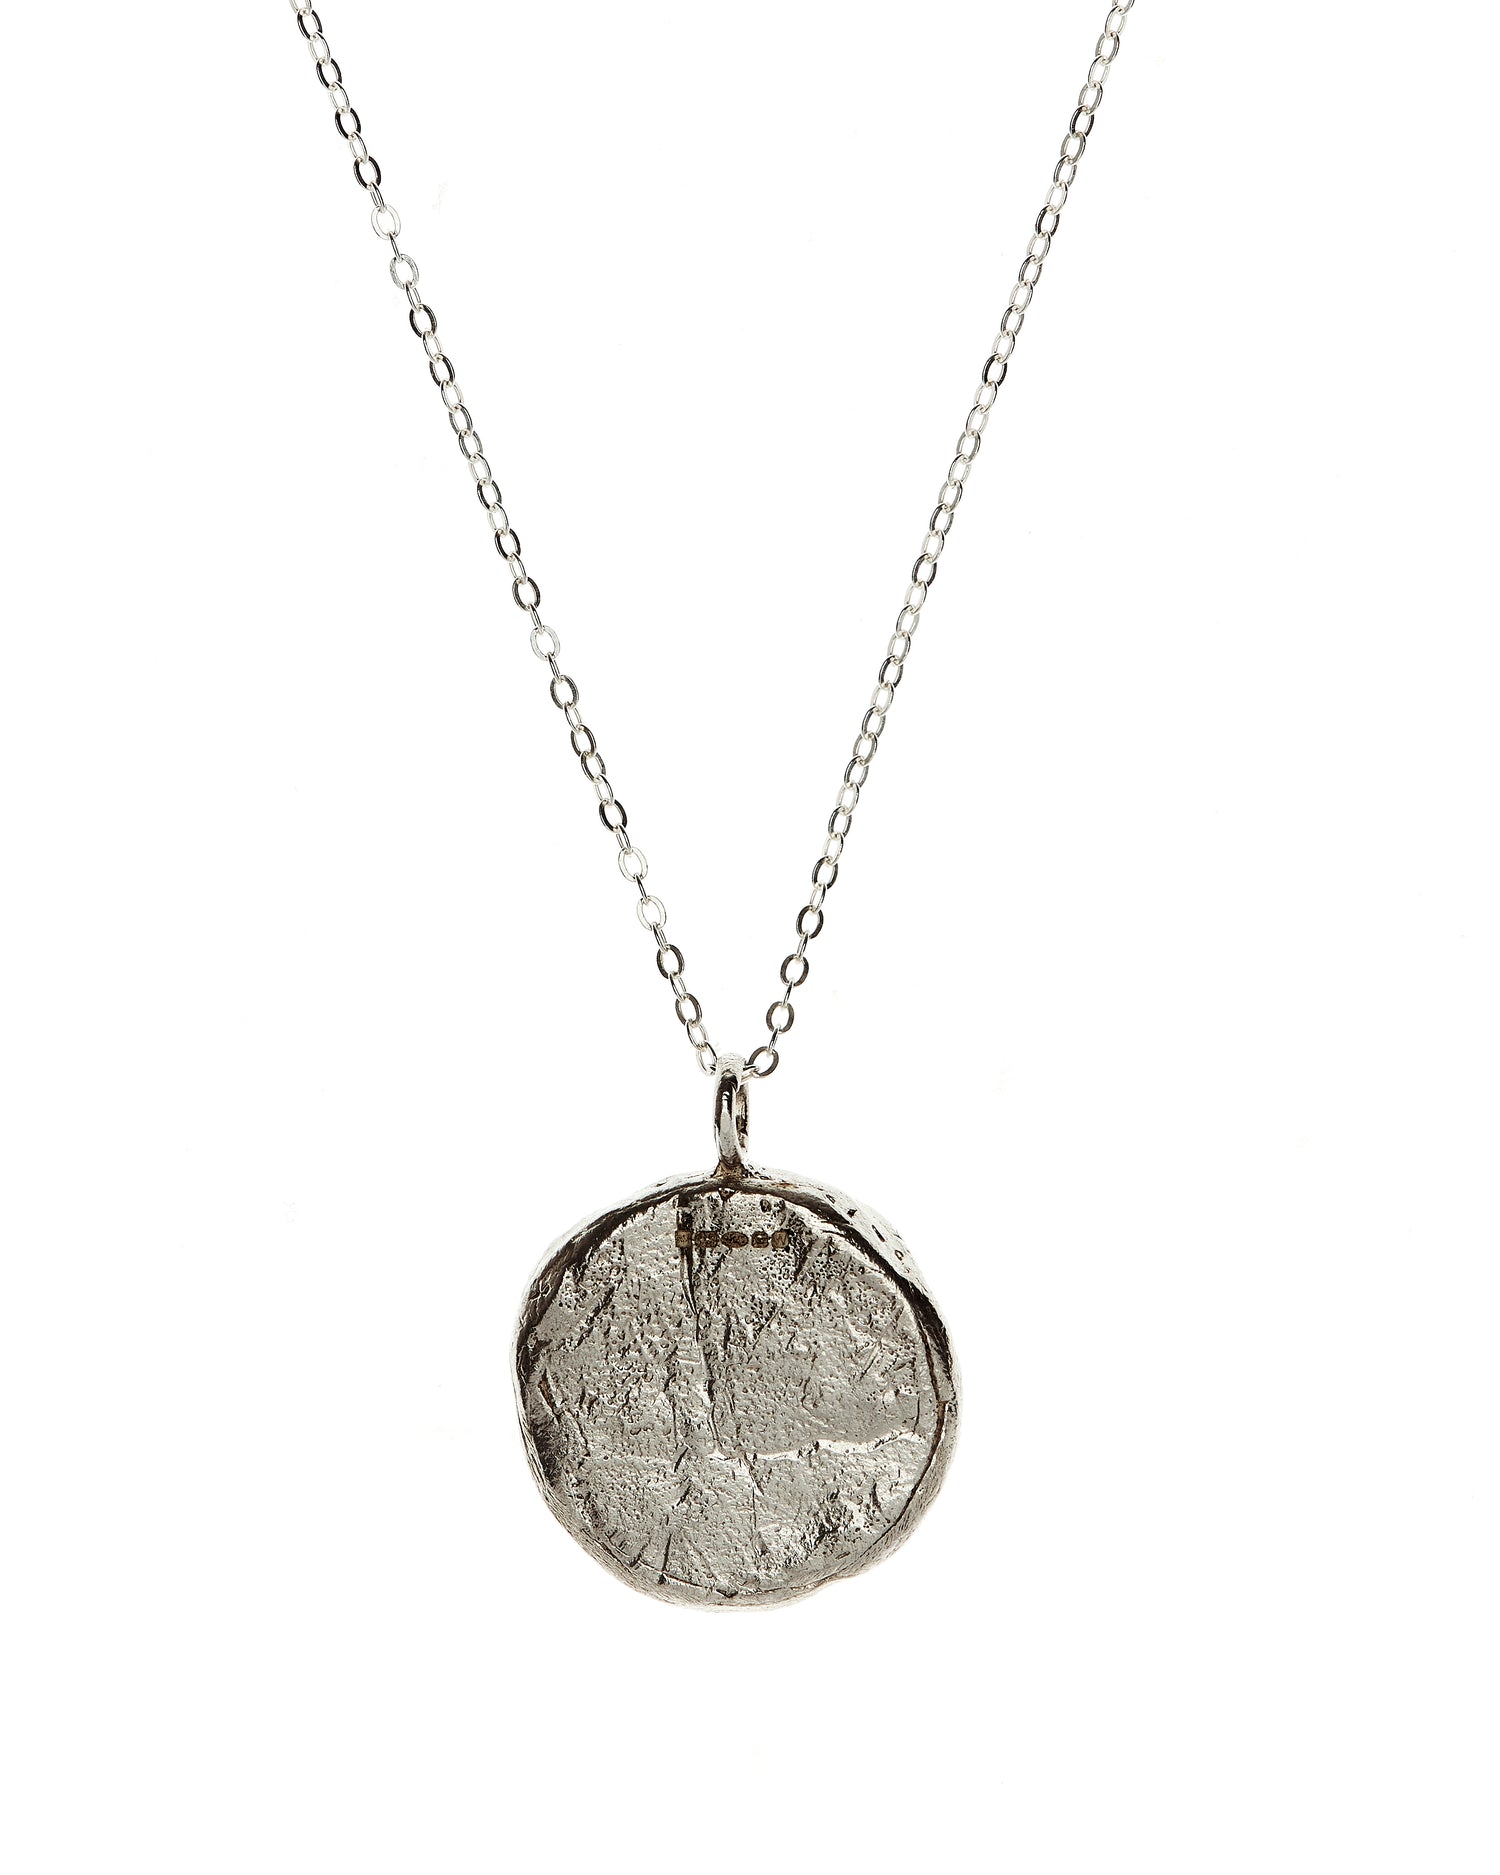 Textured sterling silver necklace